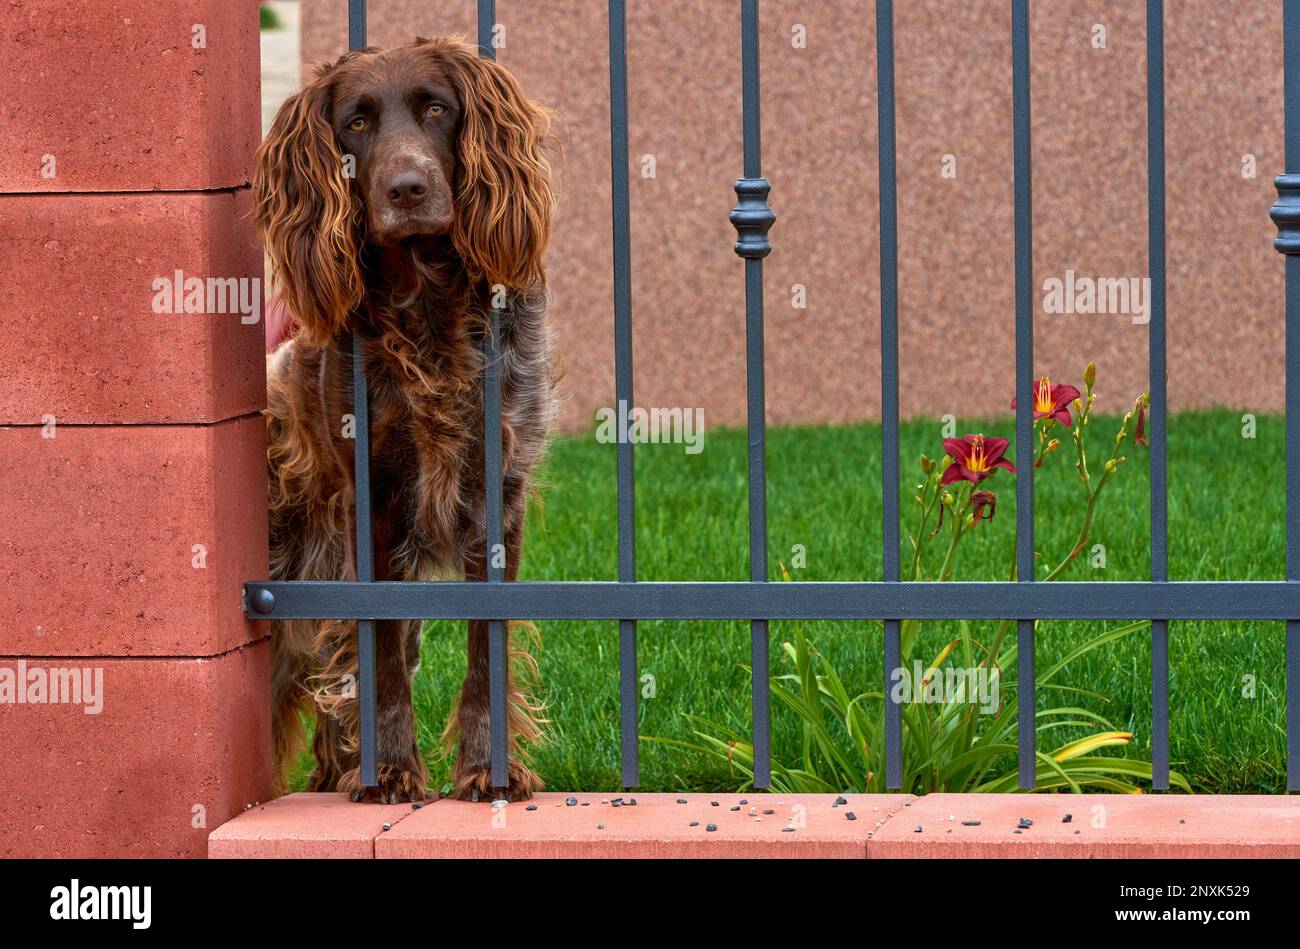 Portrait of the Irish setter through the fence bars in a Czech village Stock Photo